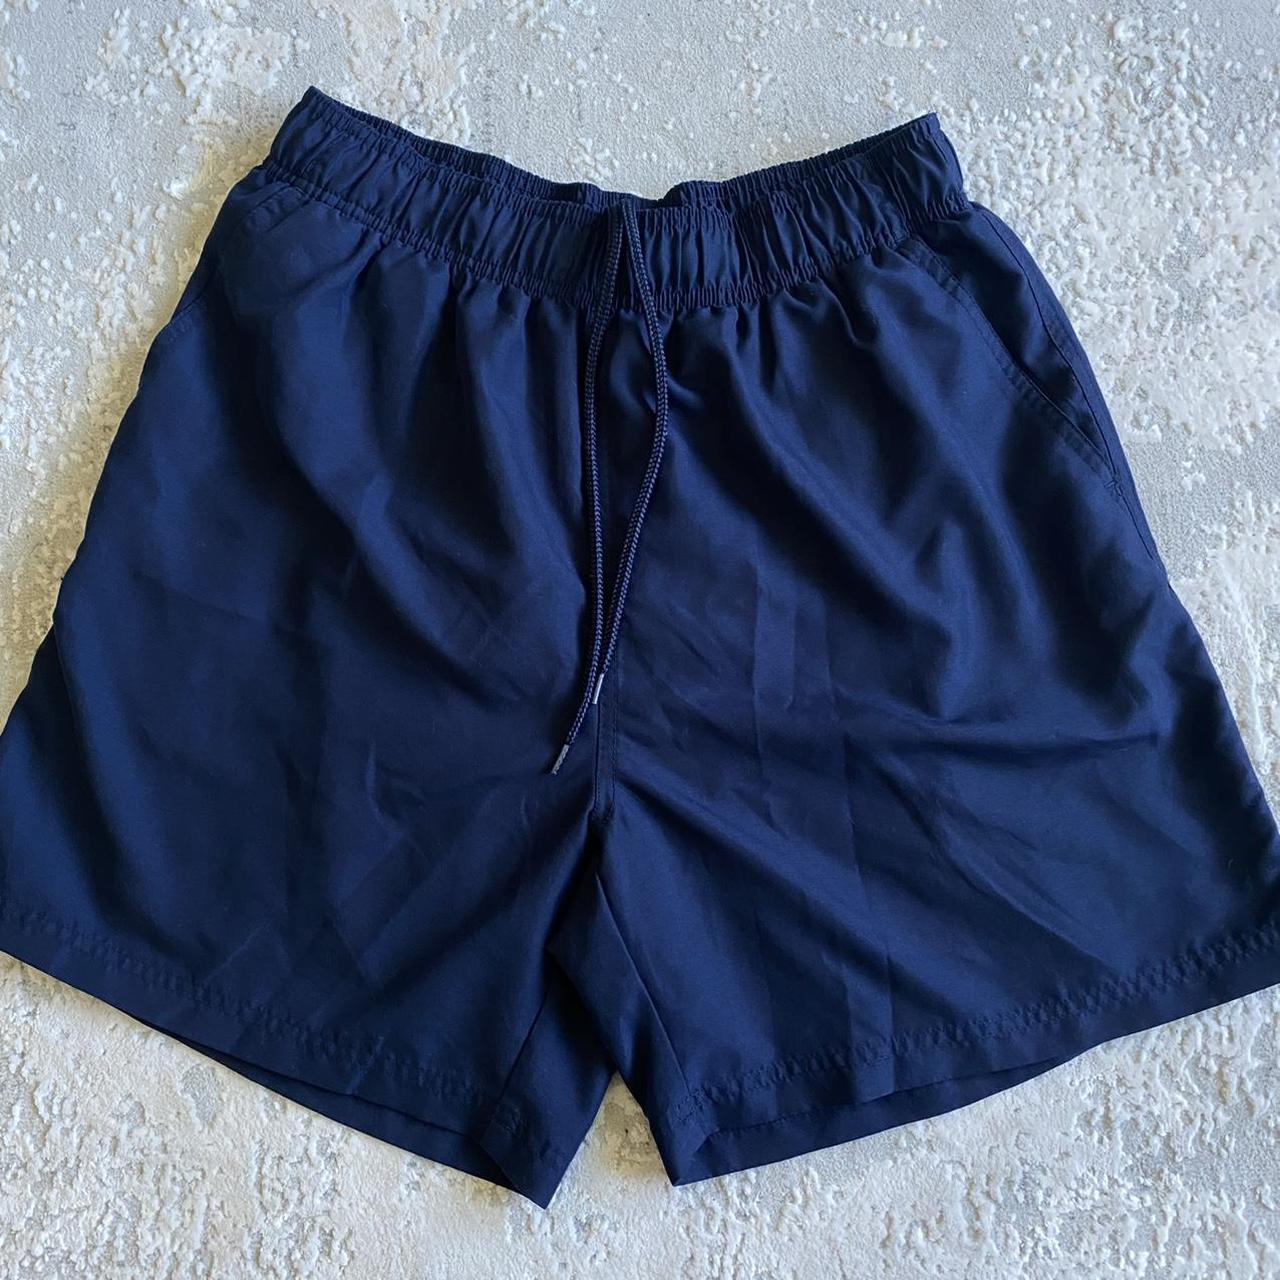 Faded Glory Men's Blue and Navy Shorts | Depop